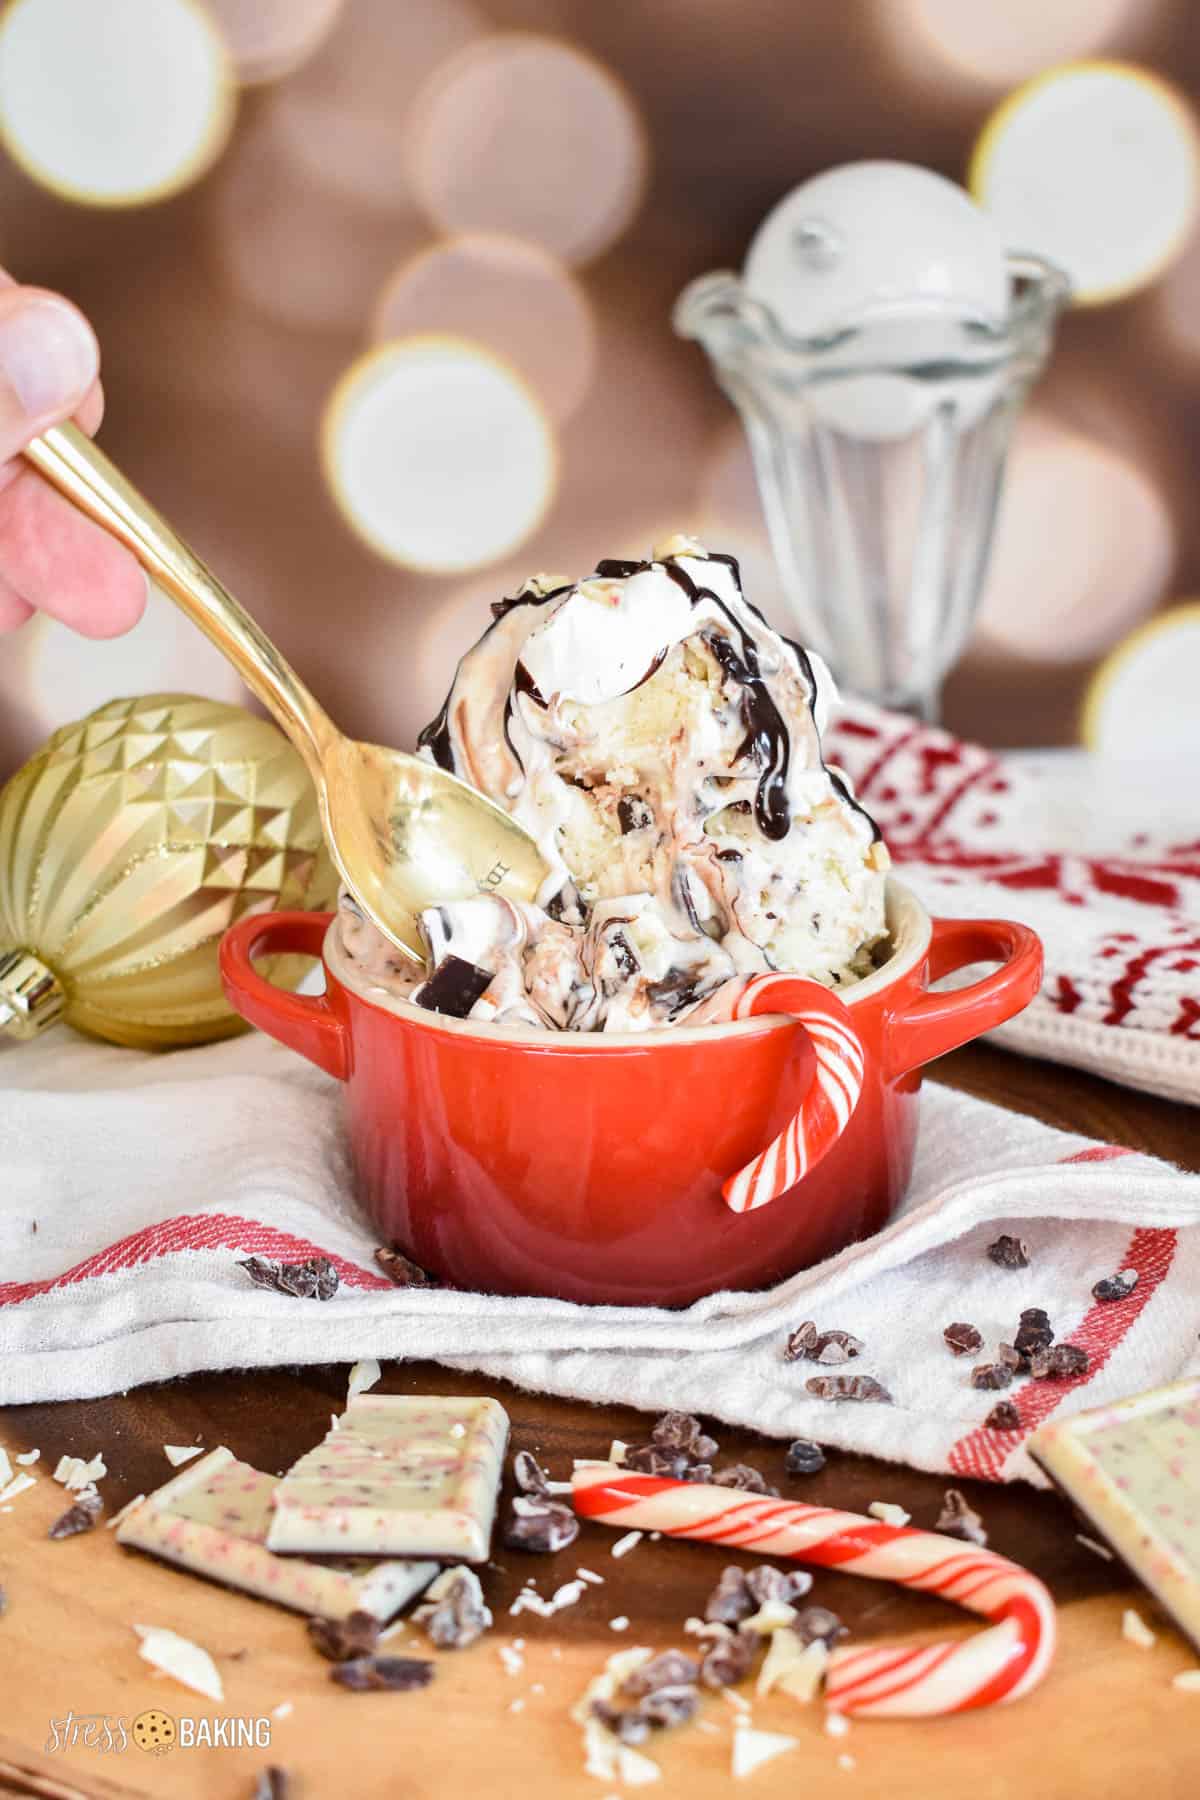 Black and white peppermint bark ice cream topped with whipped cream and chocolate drizzle in a red mini cocotte with a gold spoon taking a scoop